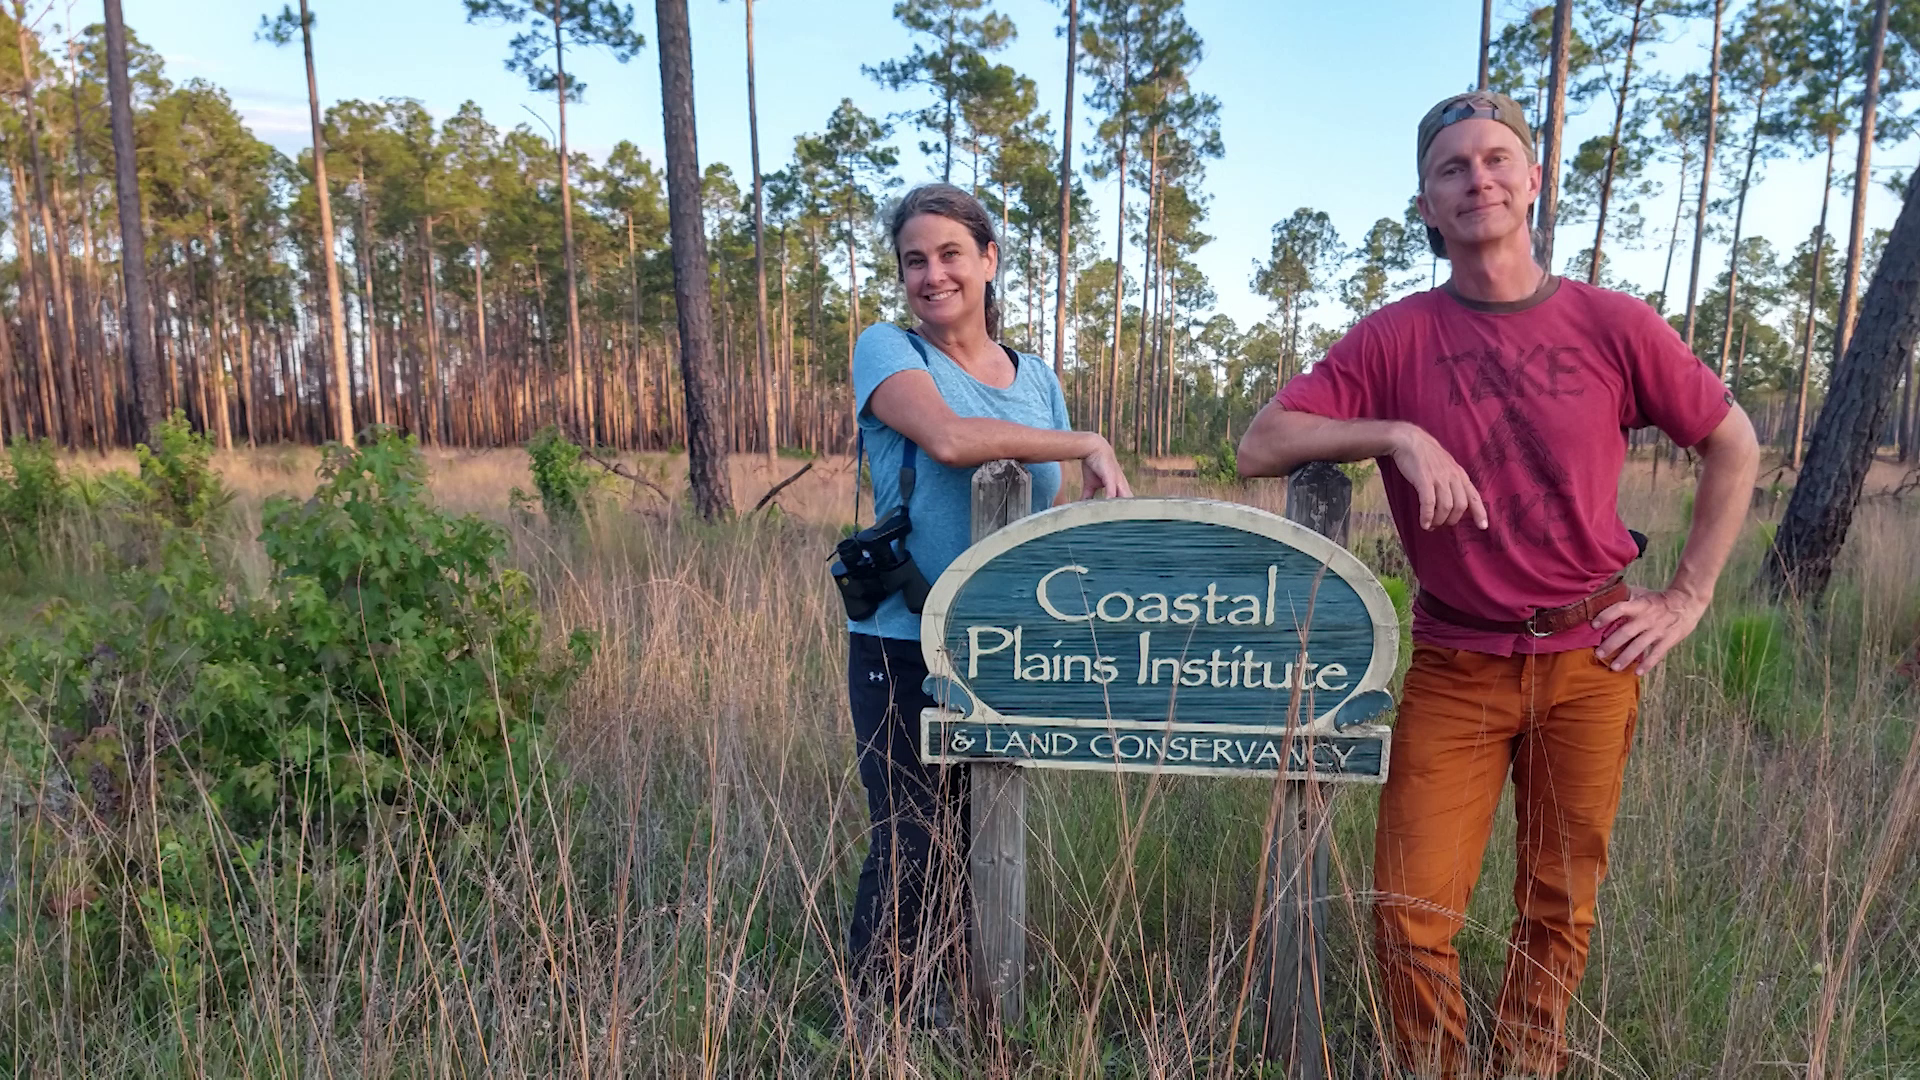 Apalachicola Lowlands Preserve: A Family’s Labor of Love